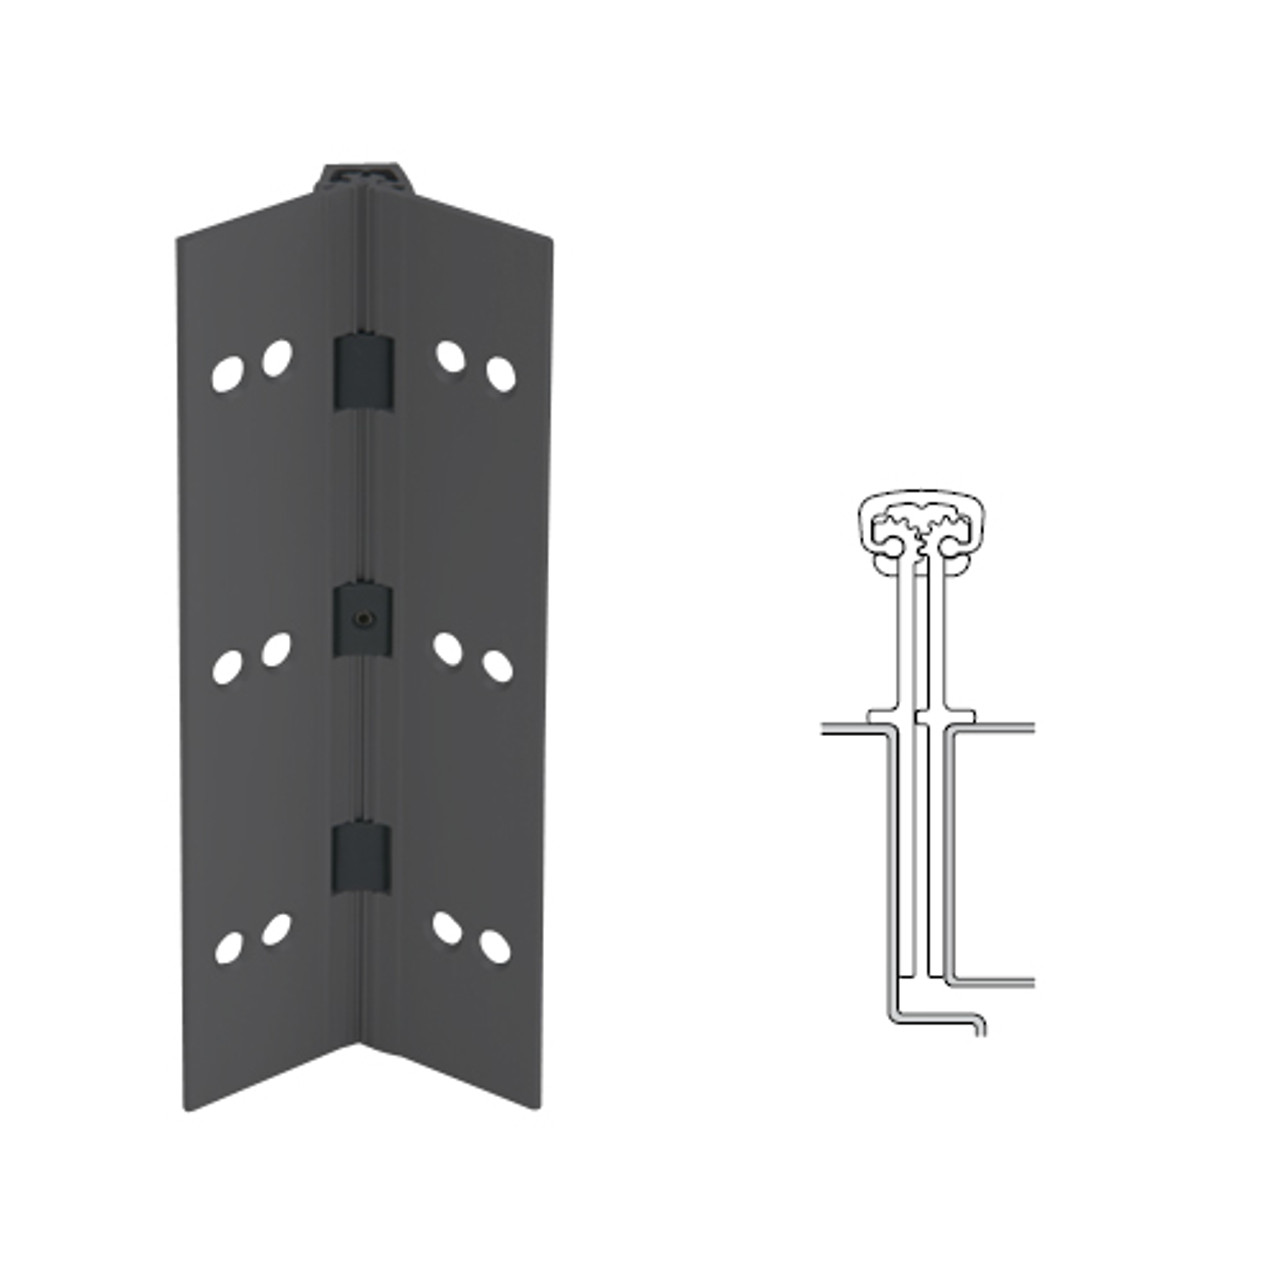 040XY-315AN-120-WD IVES Full Mortise Continuous Geared Hinges with Wood Screws in Anodized Black